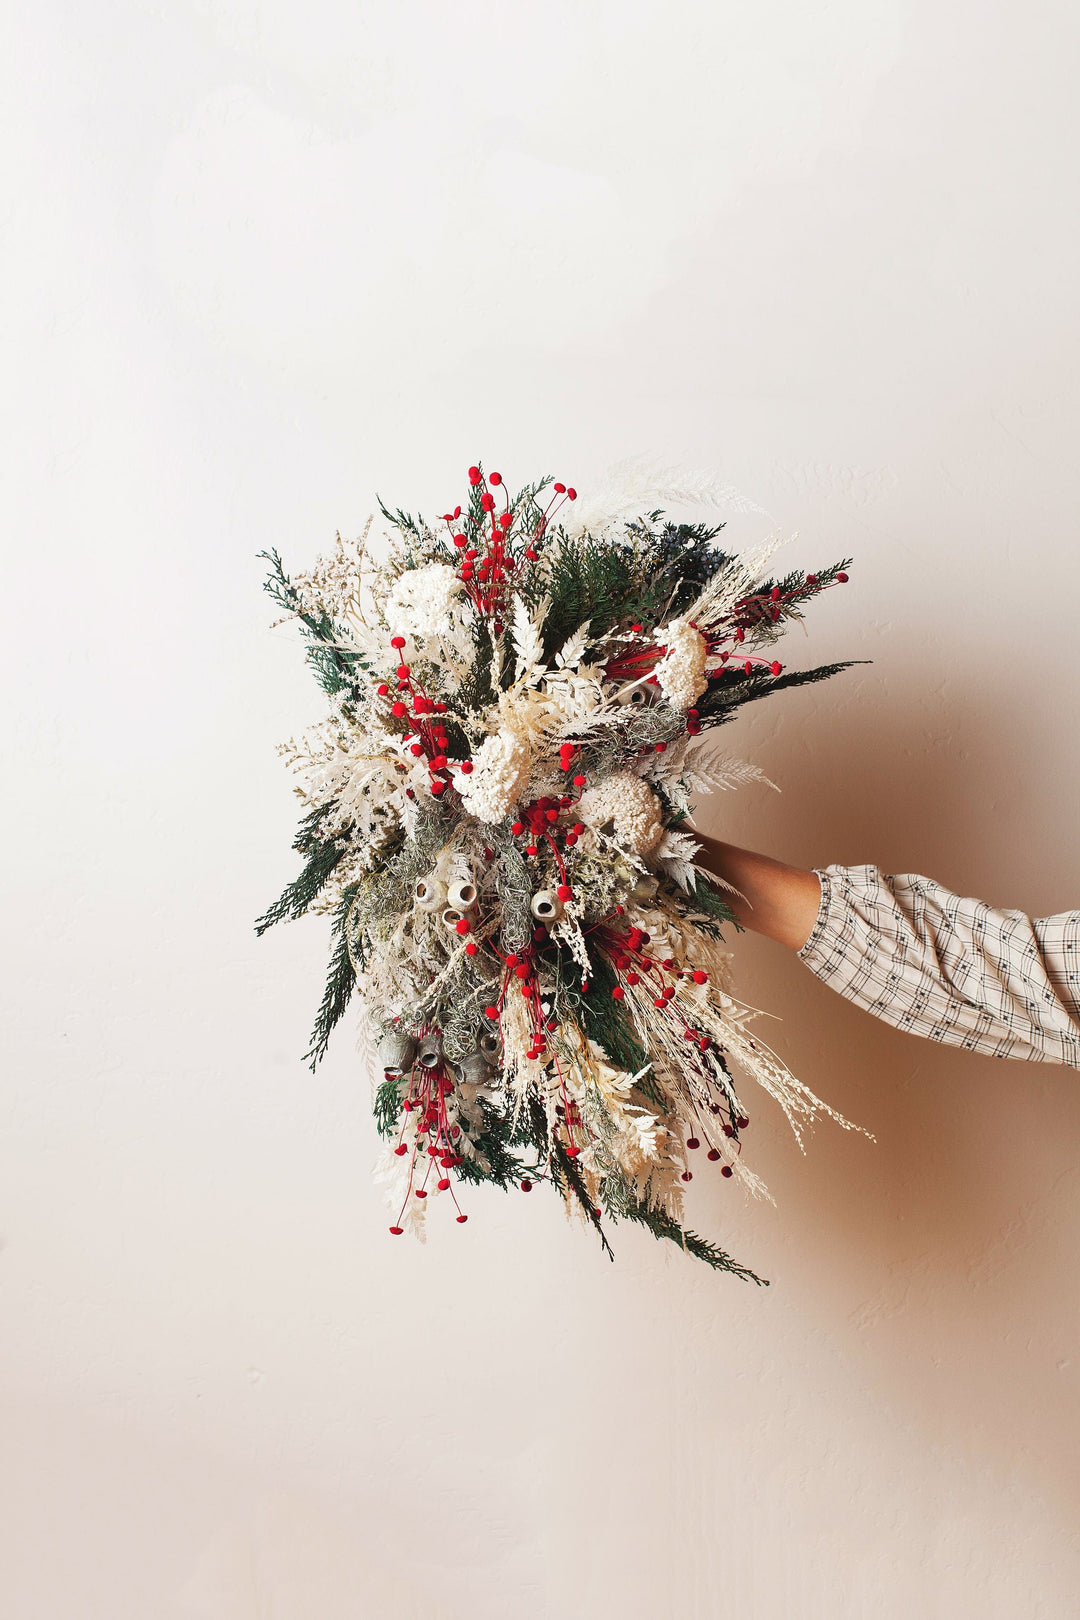 Idlewild Floral Co. Evergreen Winter Swag